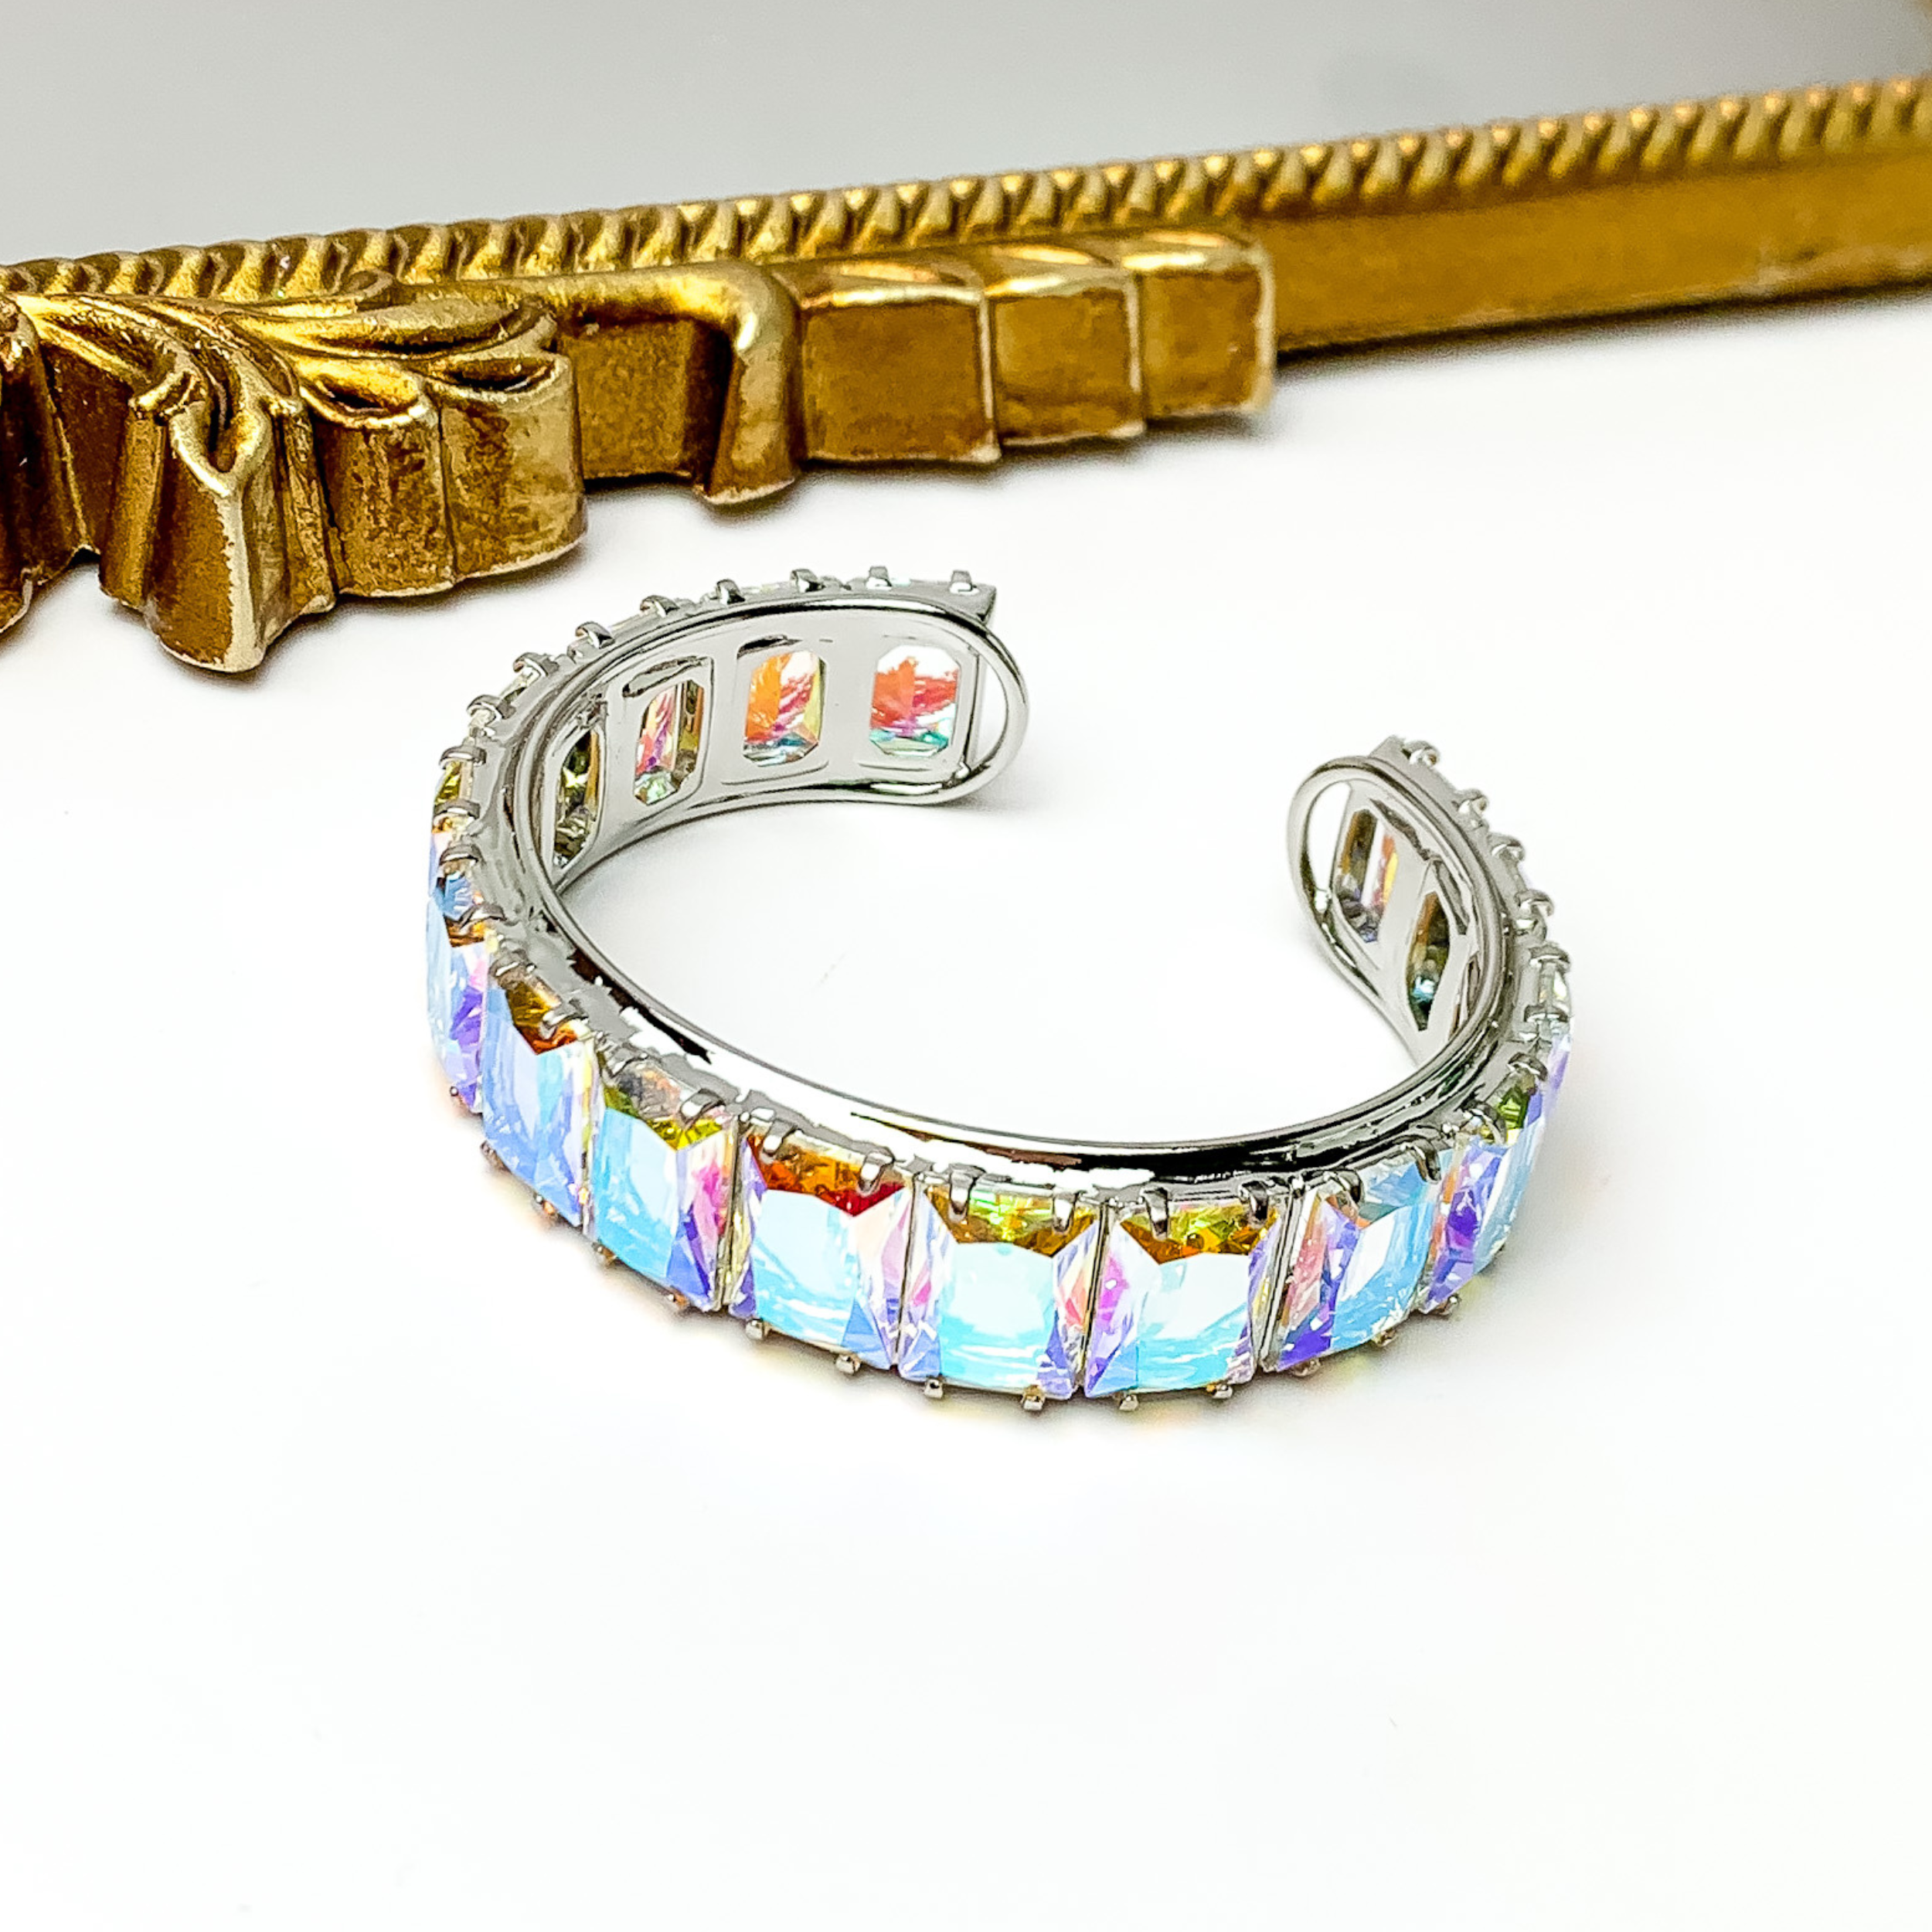 Silver bangle with a ab, rectangle crystal inlay. This bracelet is pictured on a white background with a gold mirror at the top of the picture.  